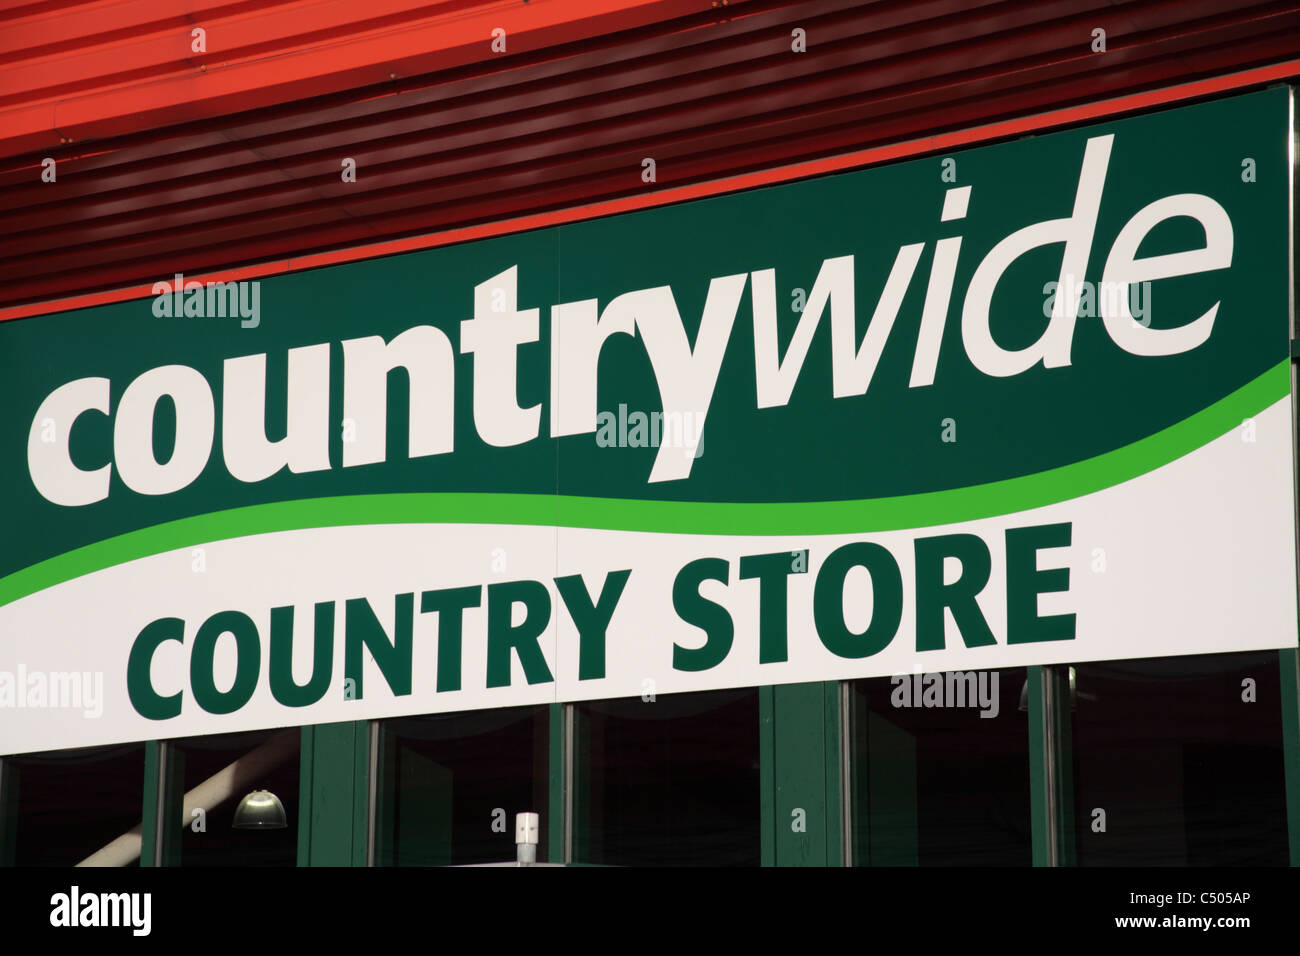 Countrywide Country Store sign Banque D'Images